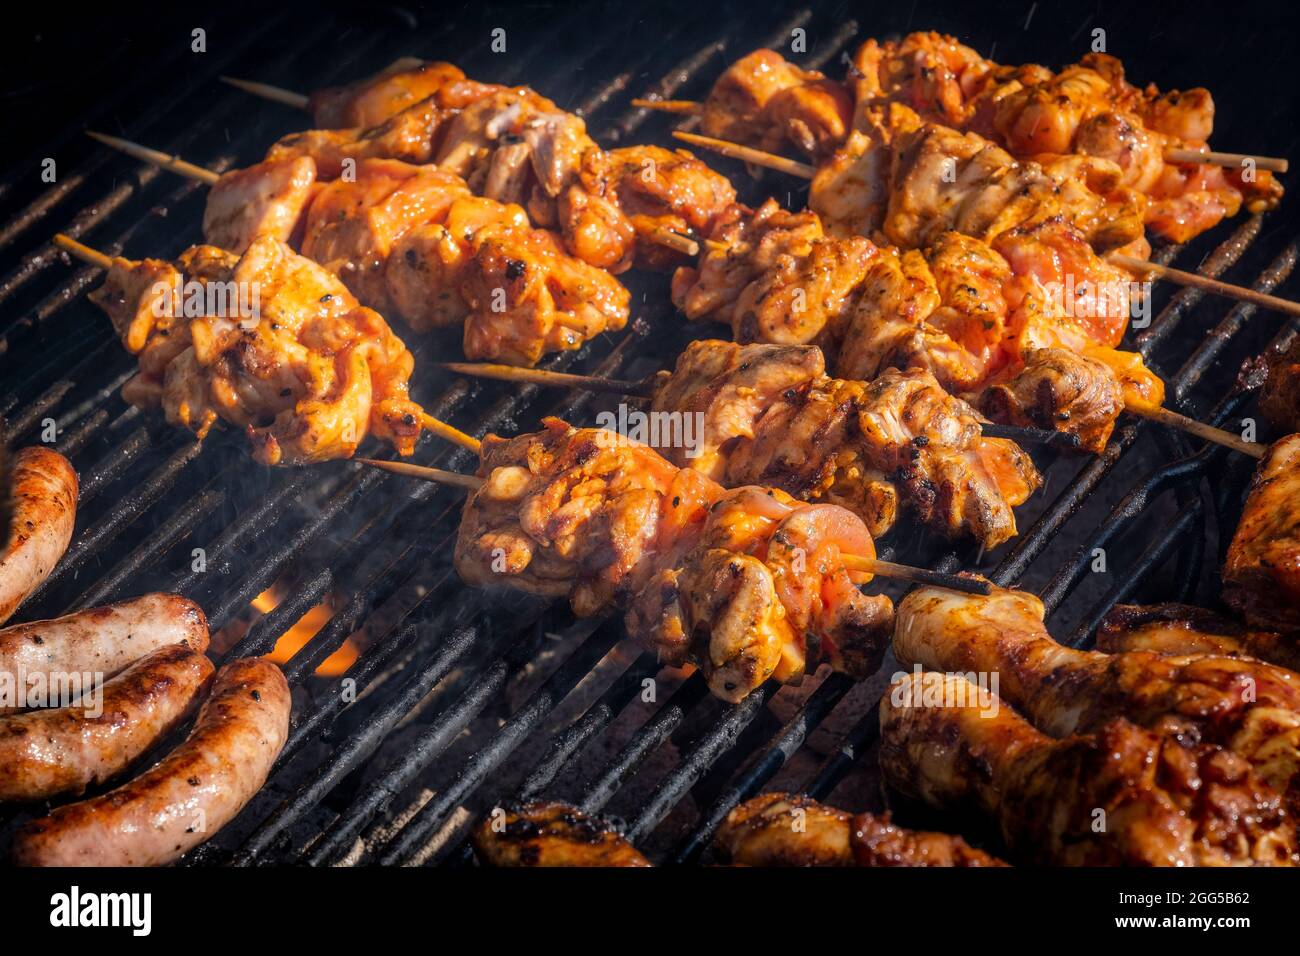 Chicken Kebabs cooking on a barbeque. Stock Photo